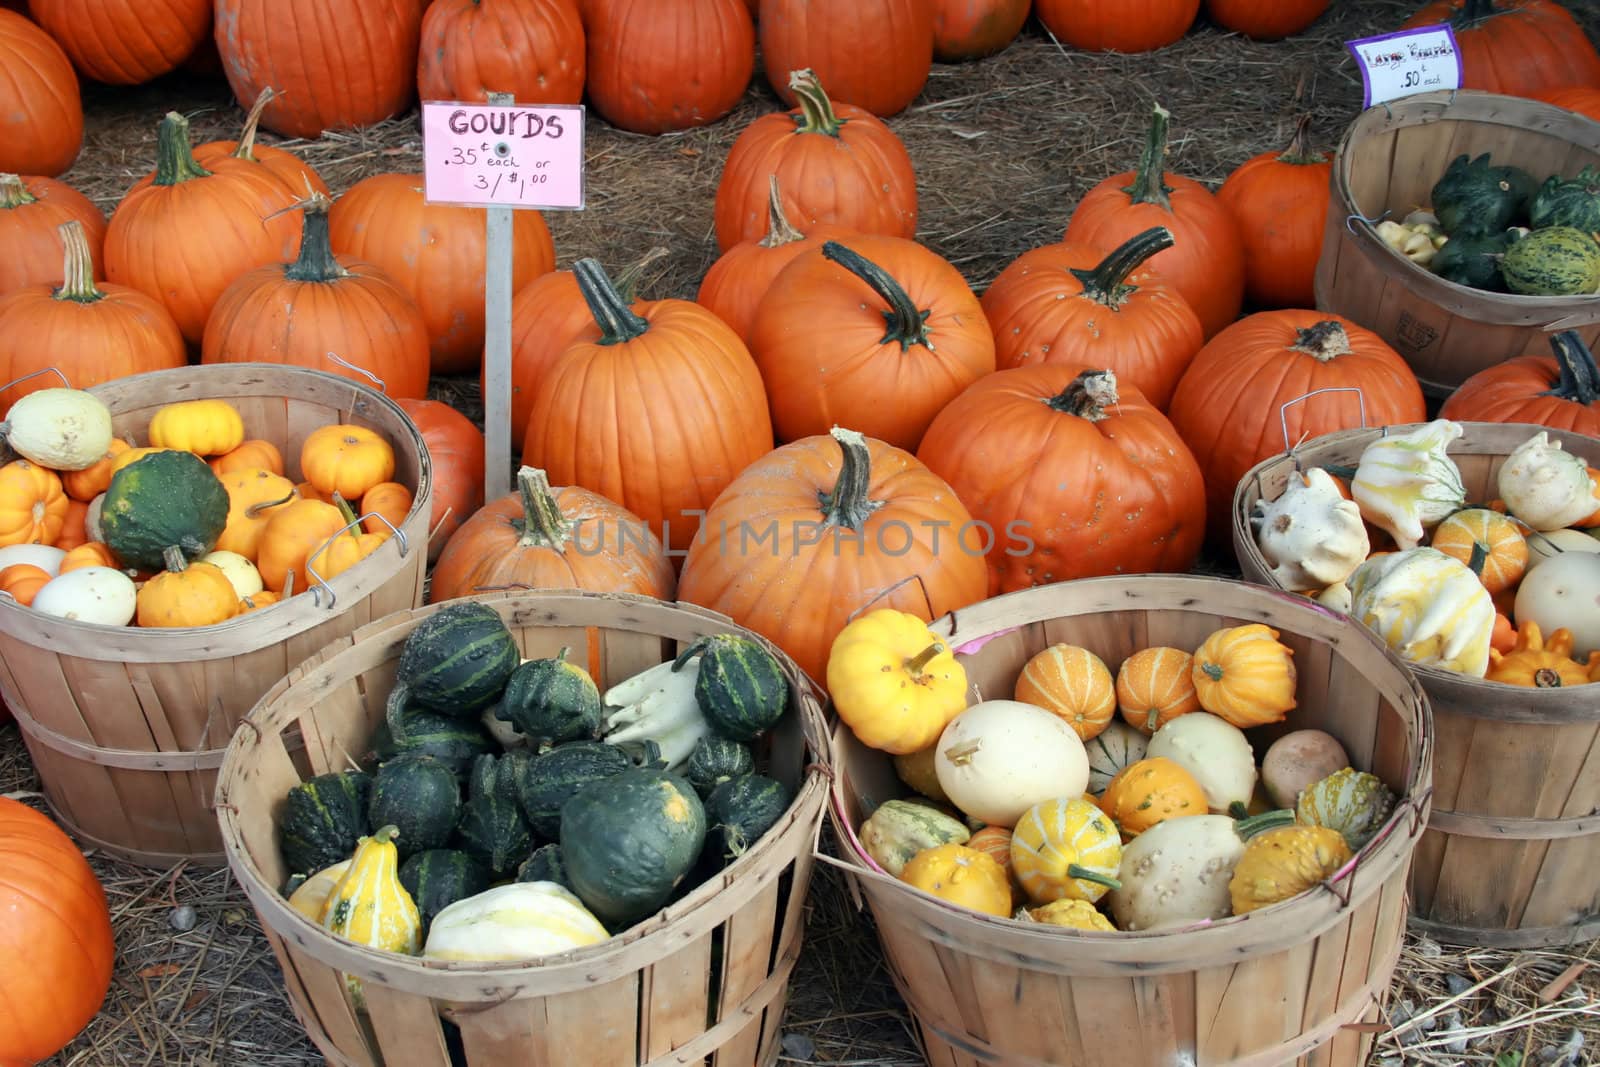 wide variety of decorative gourds and pumpkins for sale in Autumn